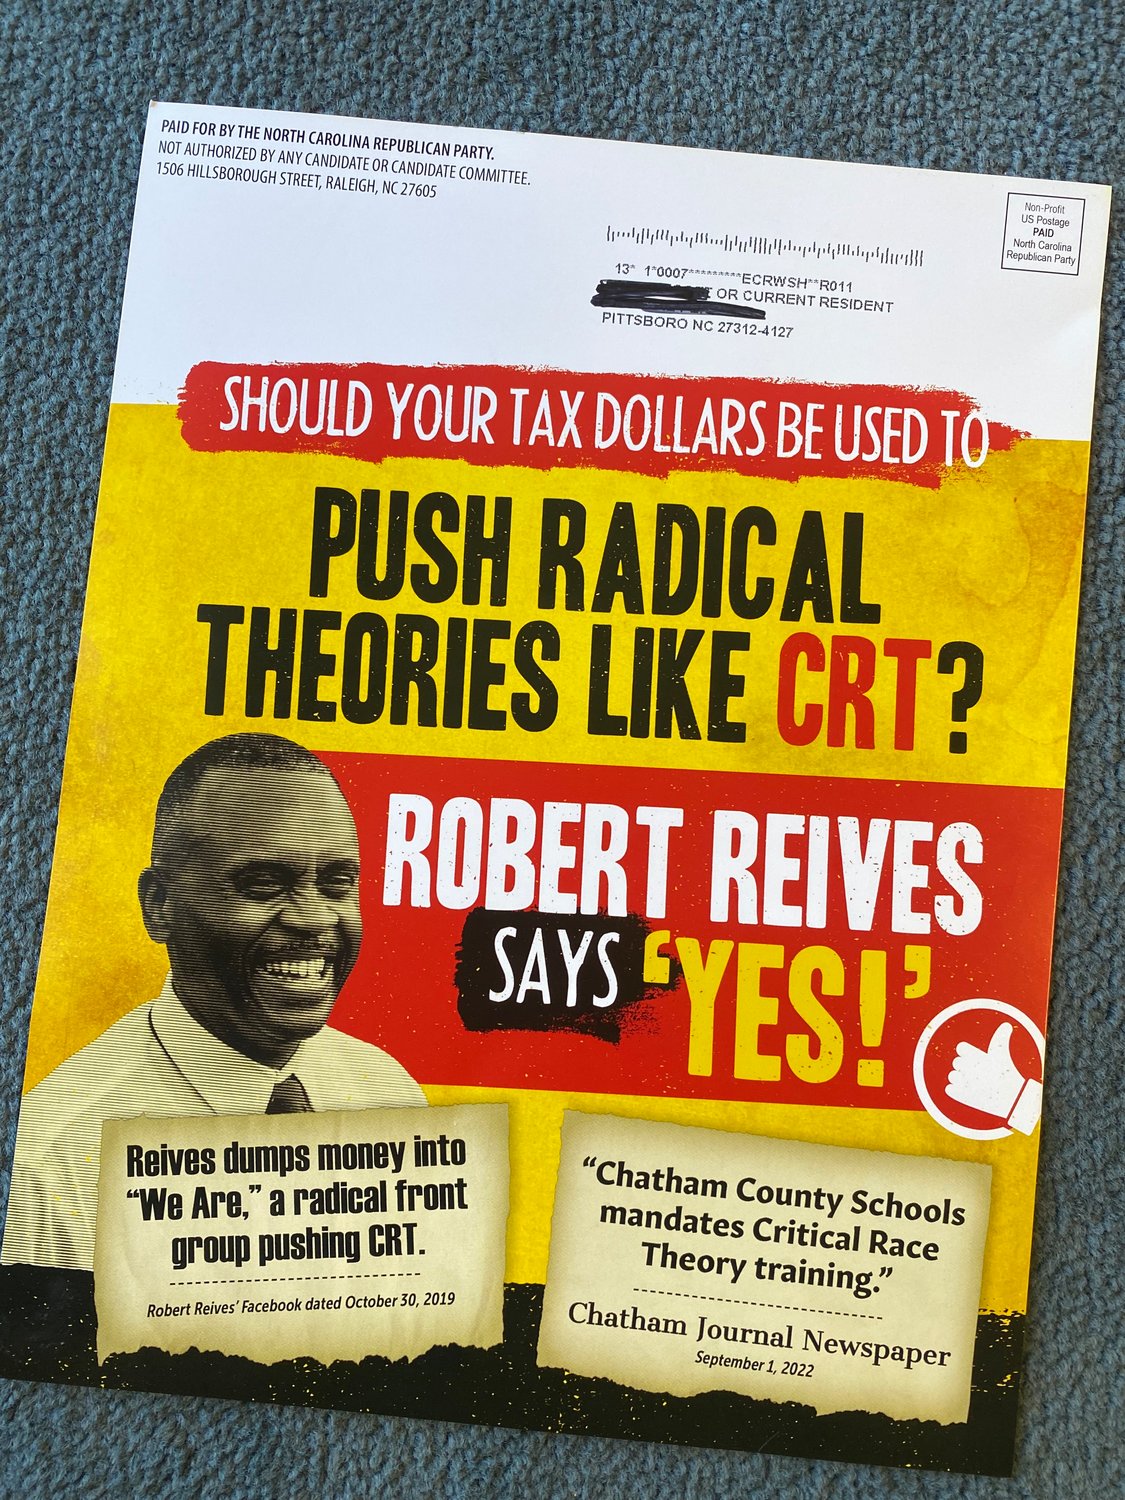 A political mailer sent to Dist. 54 voters by the North Carolina Republican Party attacking Robert Reives II.